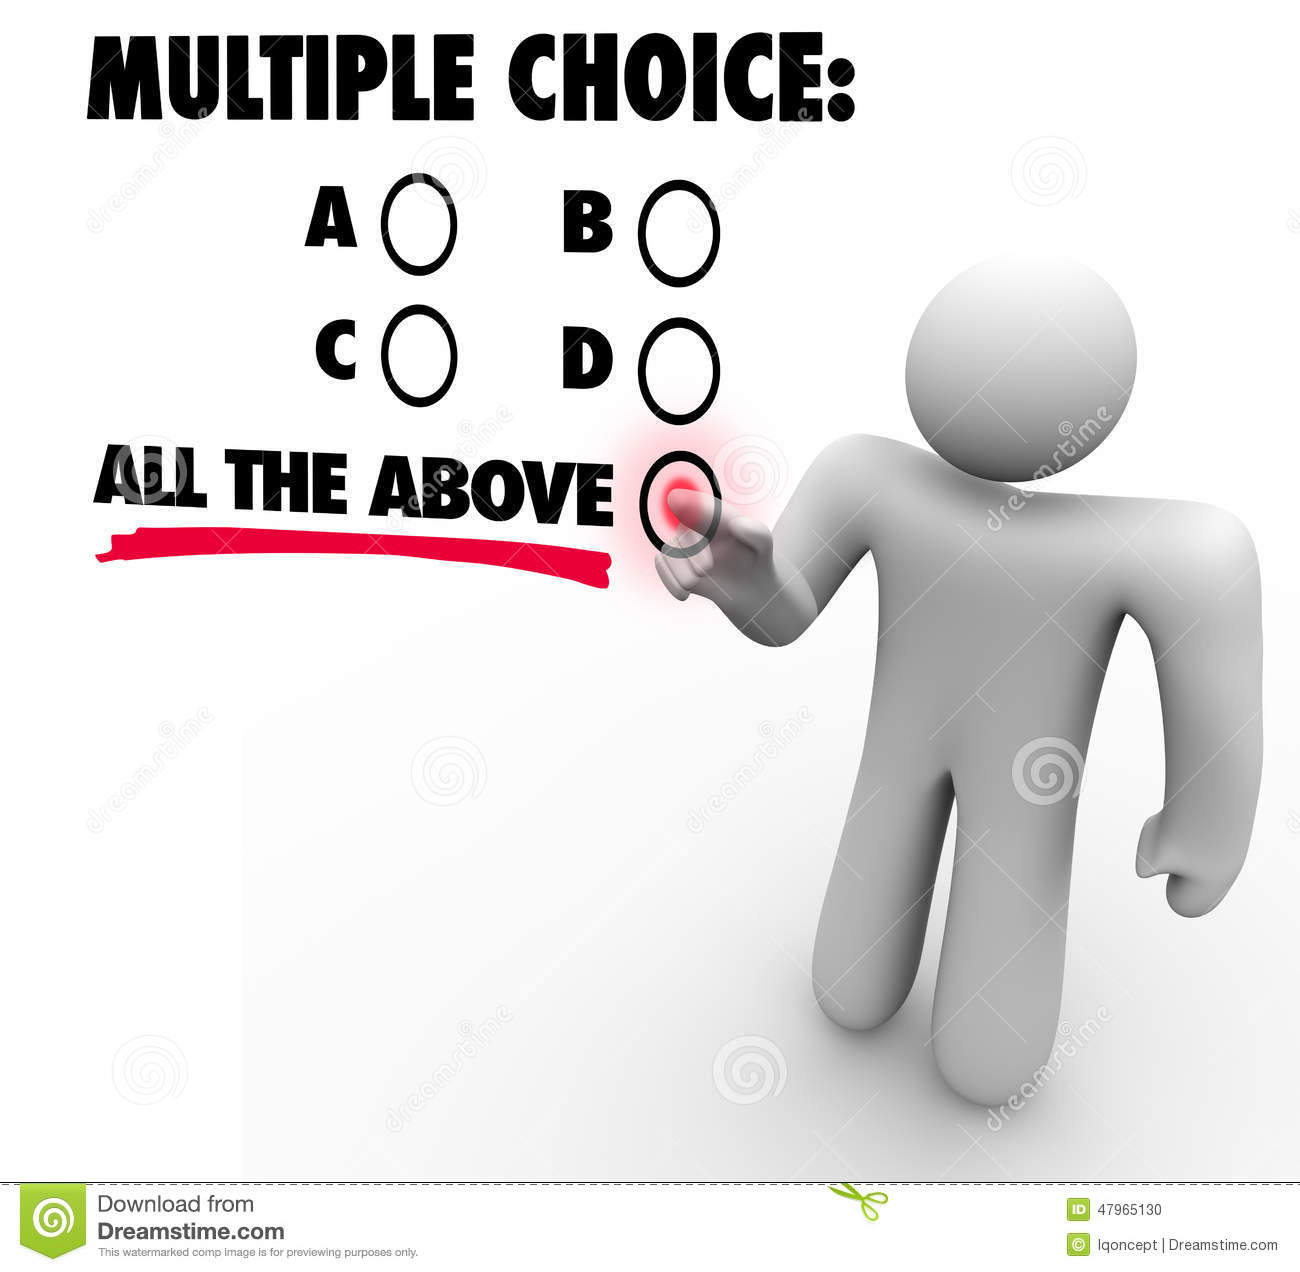 multiple-choice-all-above-options-test-quiz-uncertainty-gues-words-touch-screen-wall-man-selecting-option-47965130.jpg